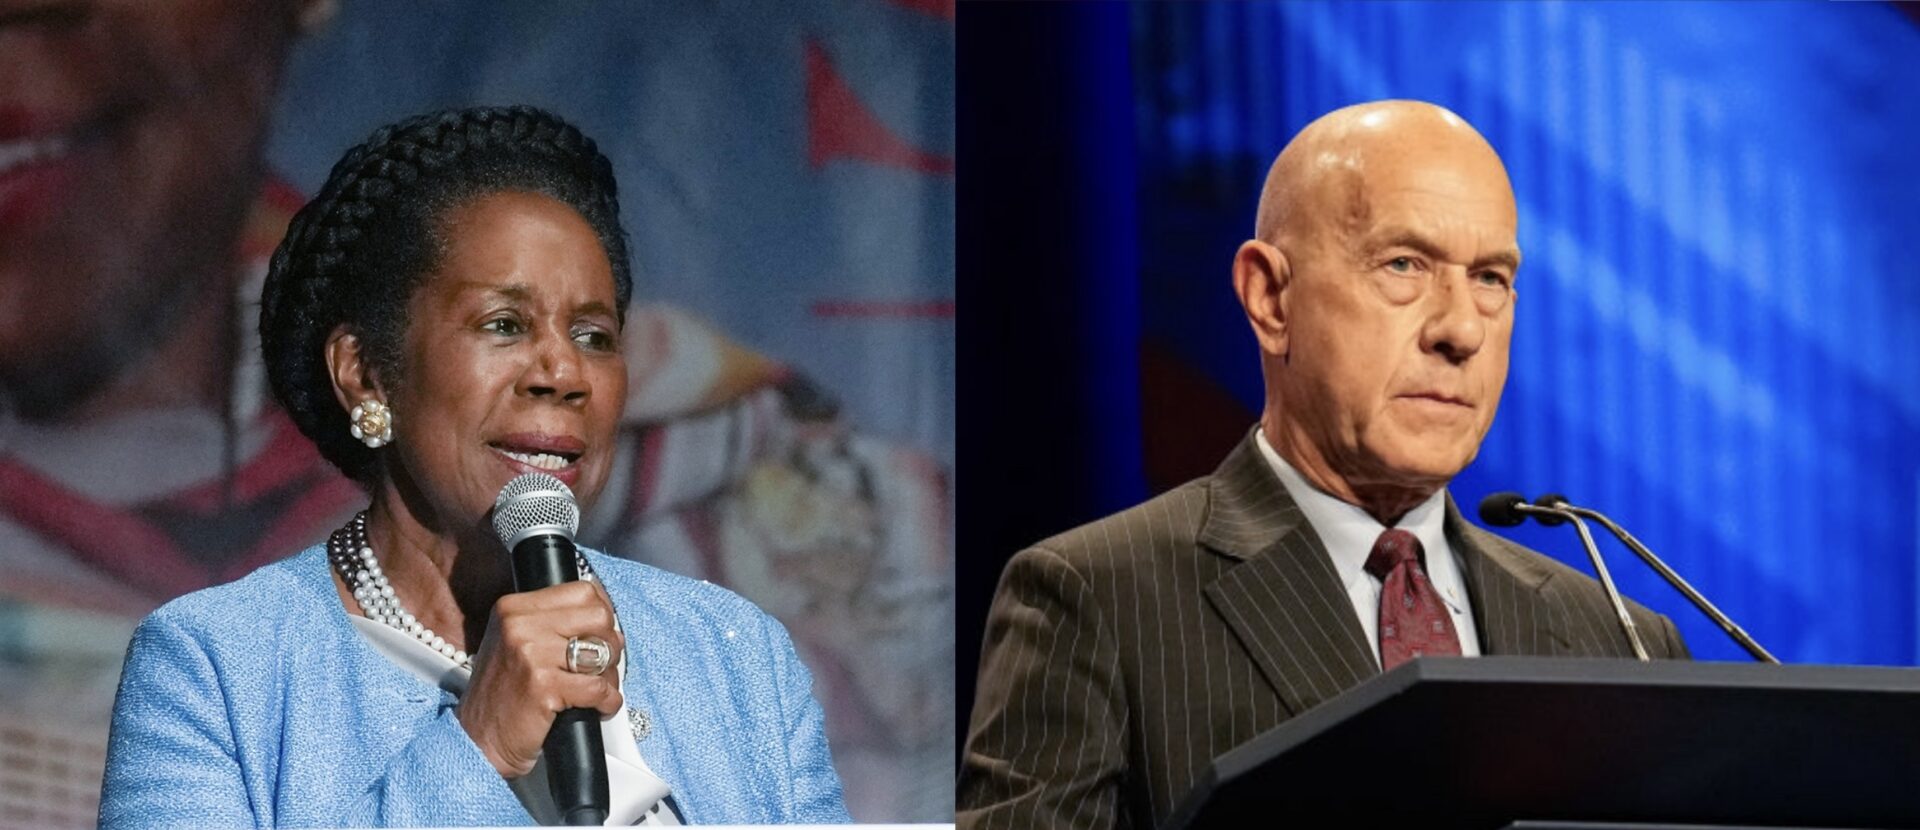 Sheila Jackson Lee and John Whitmire Headed For Runoff In Houston Mayoral Race